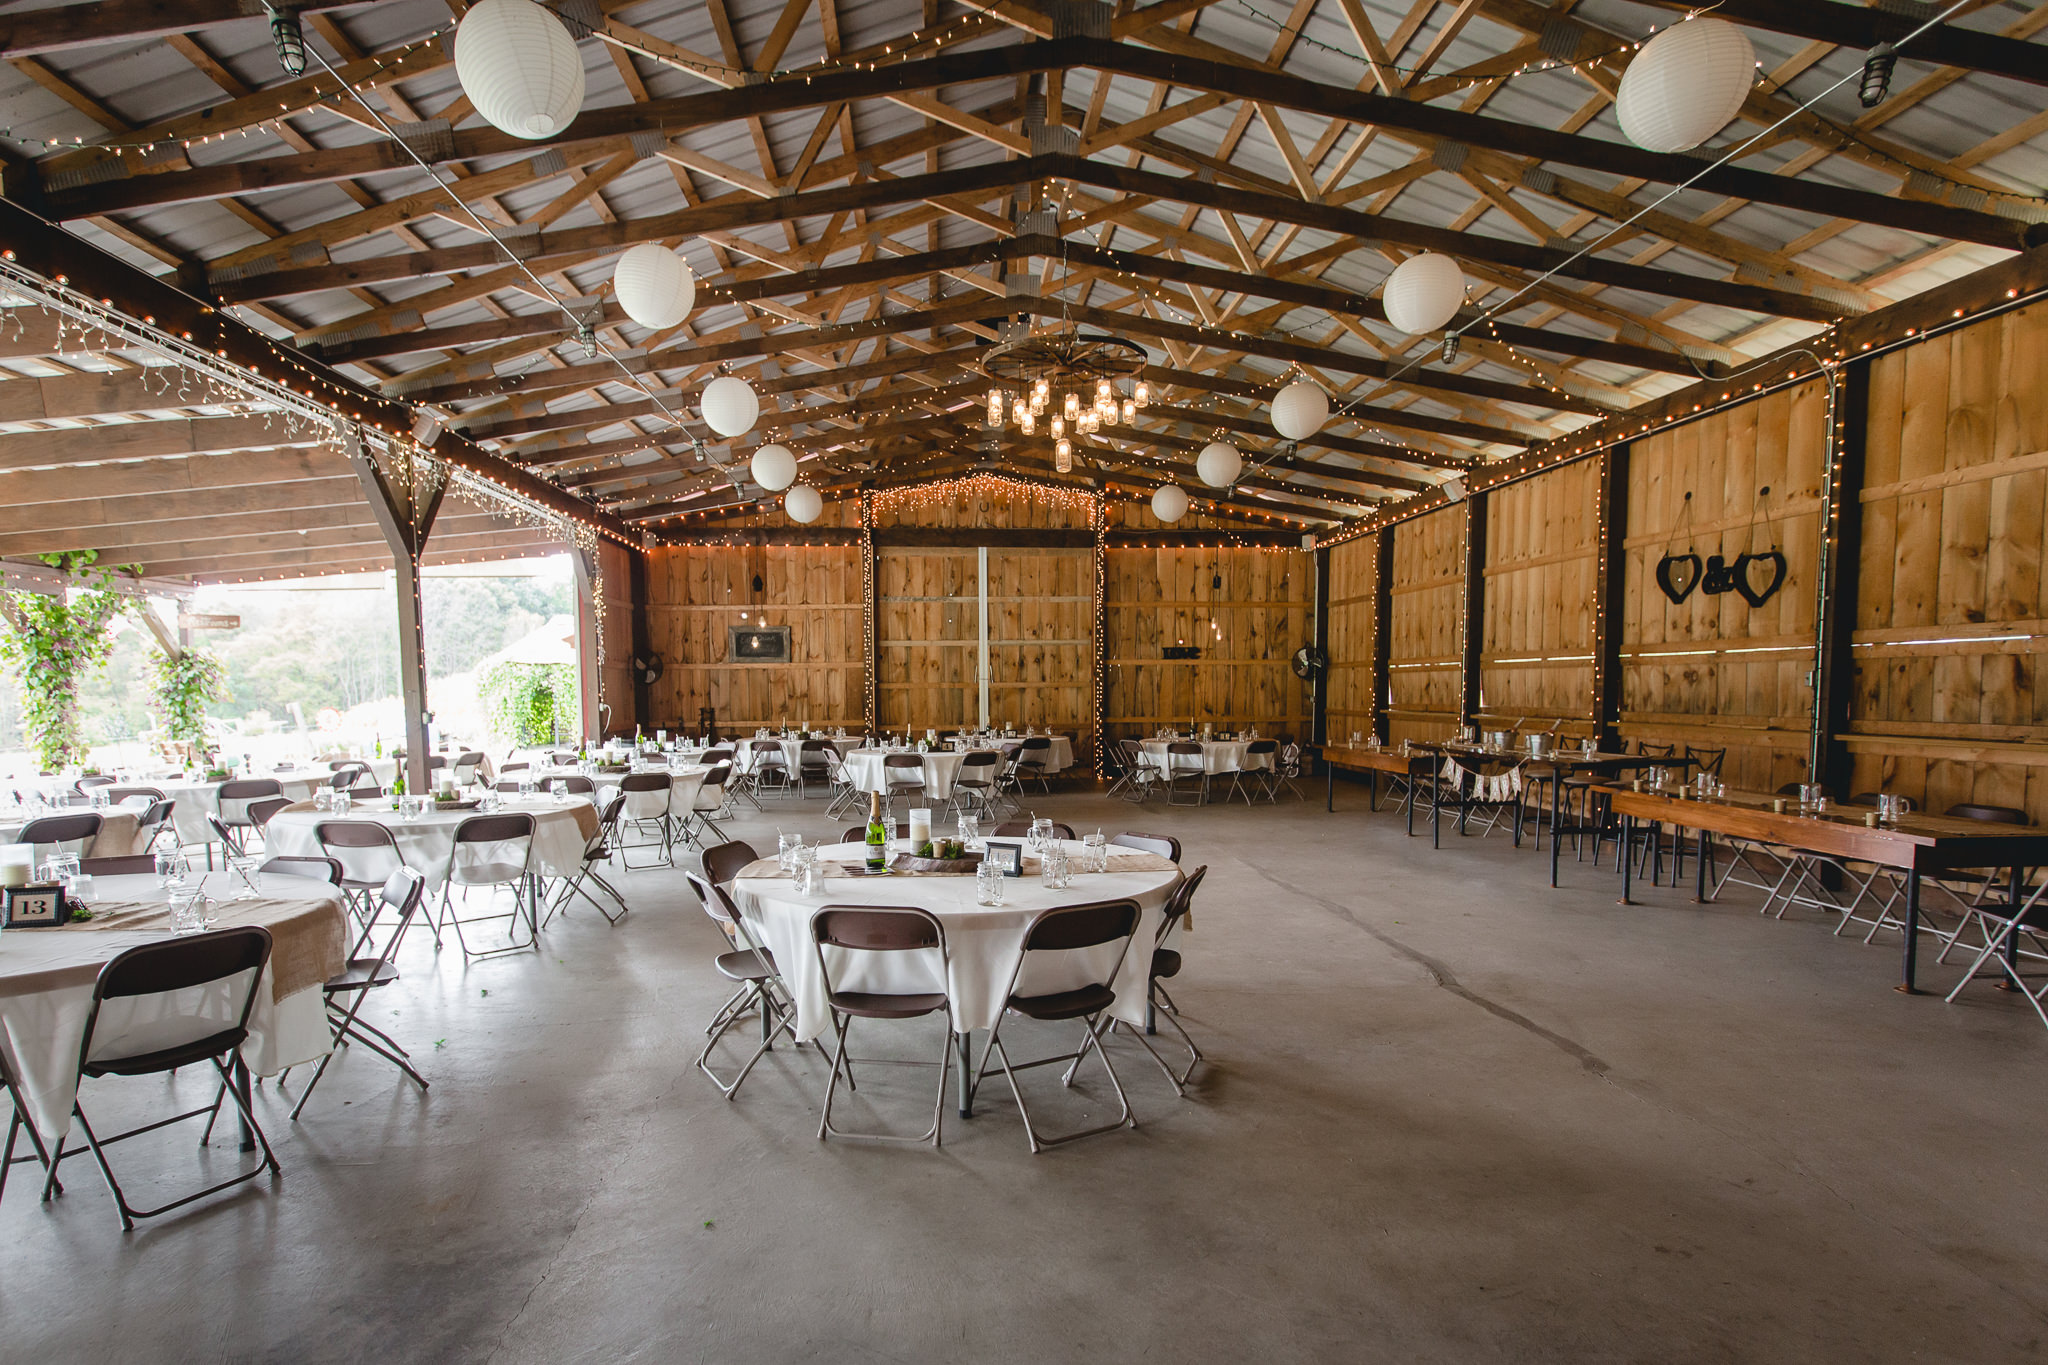 The Barn at Soergel Hollow decorated for a fall wedding reception